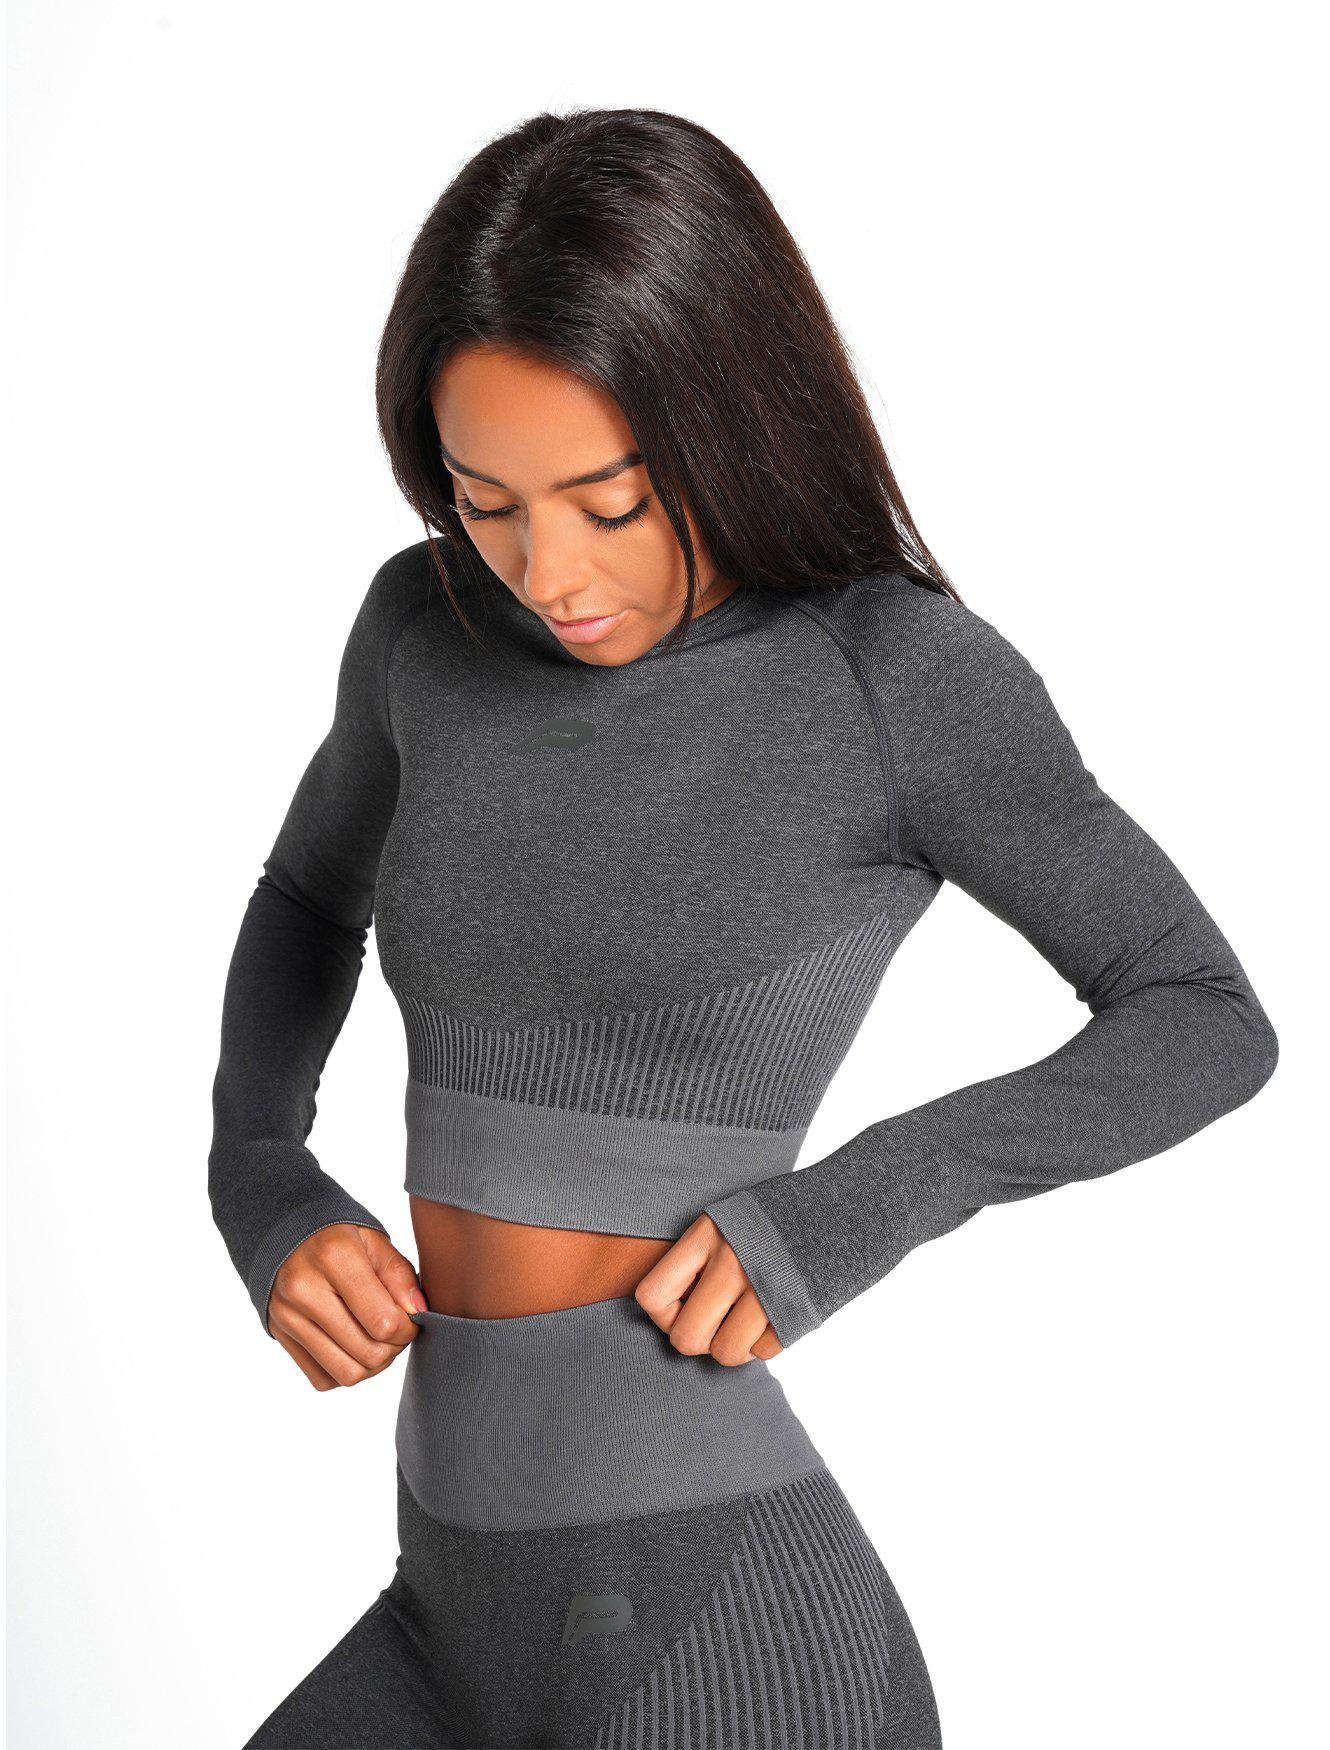 ADAPT Seamless Long Sleeve Crop Top / Black.Charcoal Pursue Fitness 2